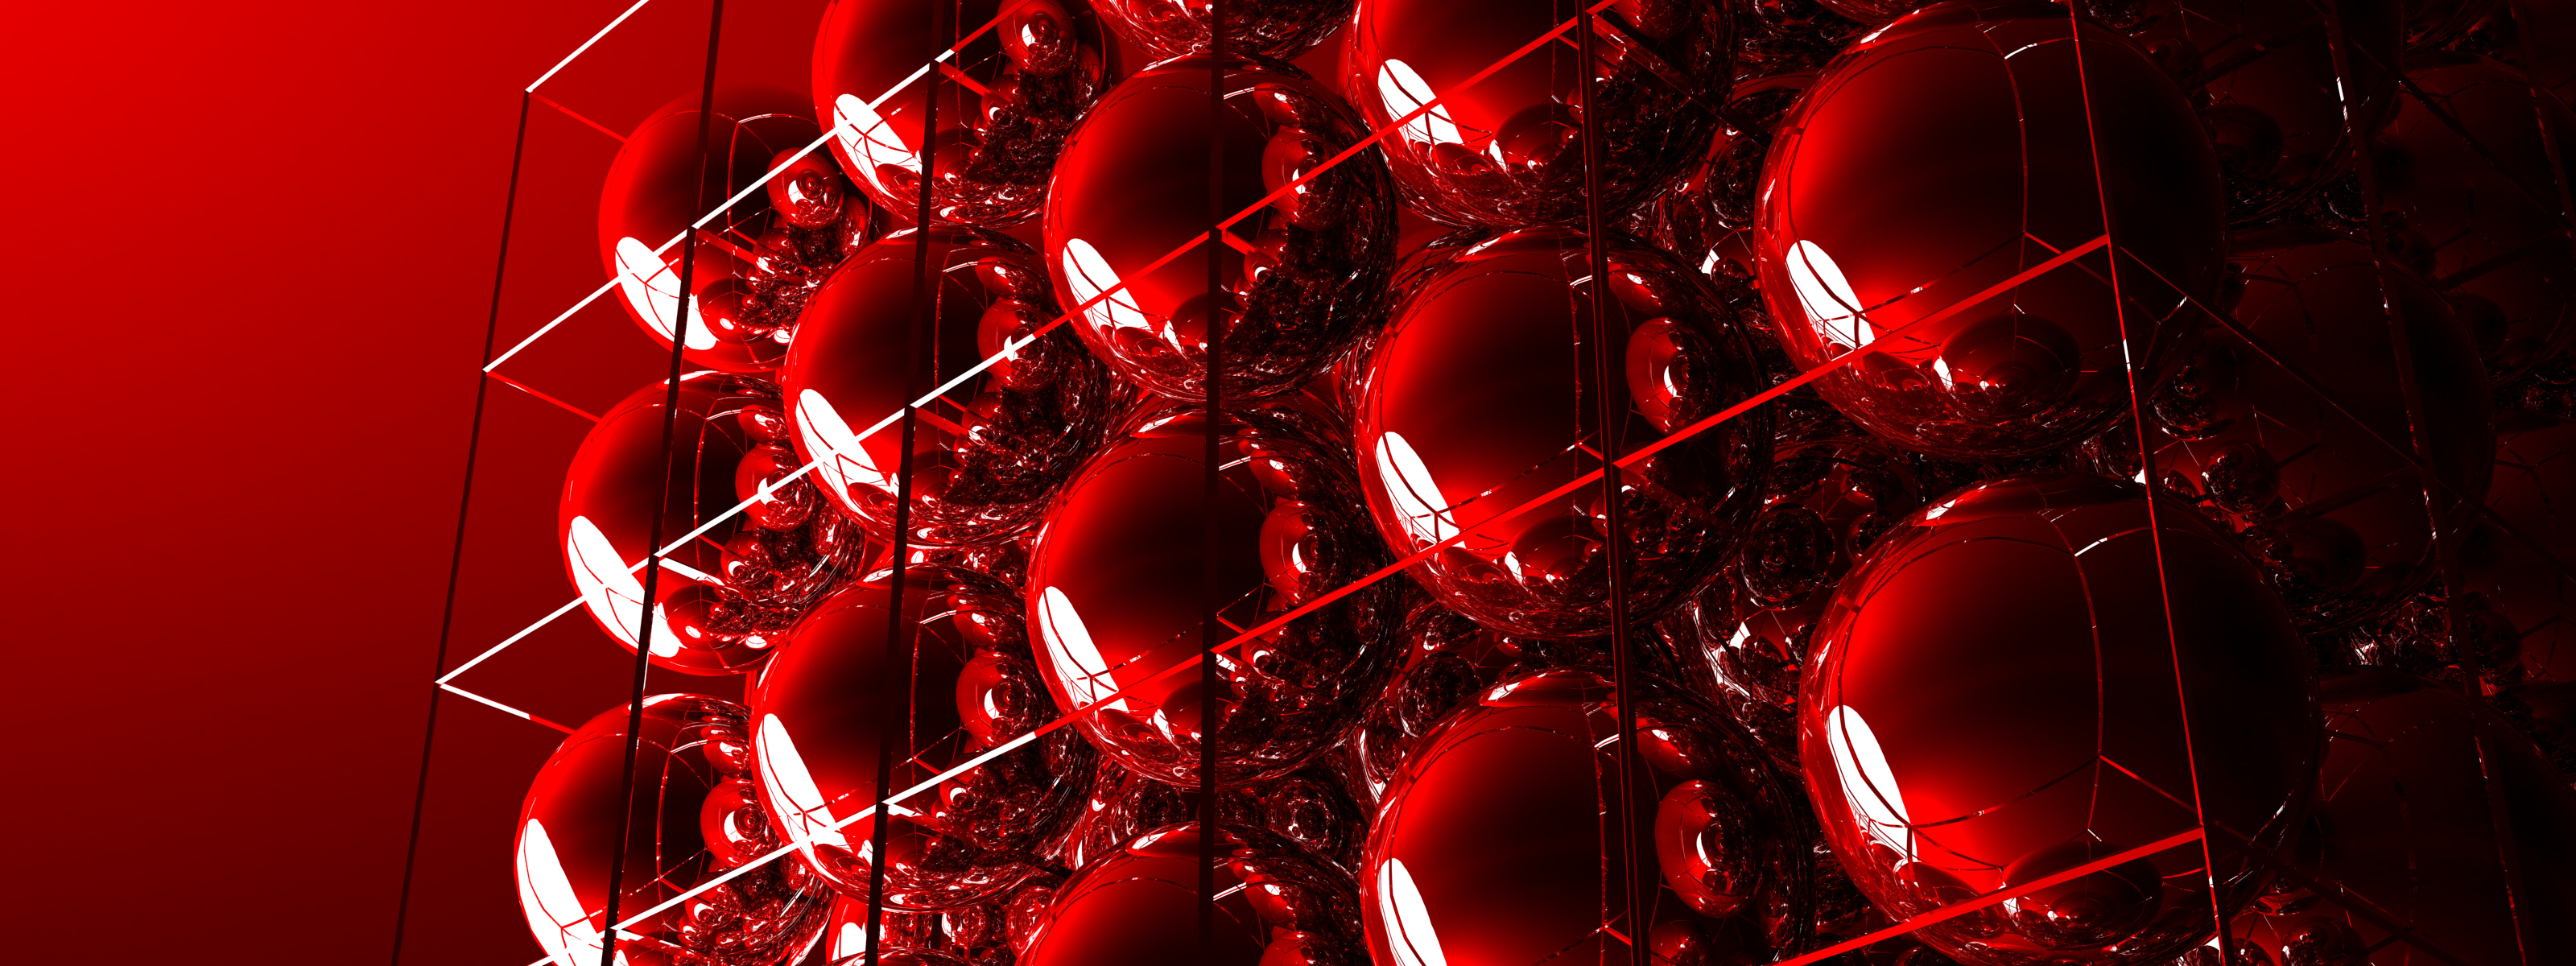 3d, artistic, other, ball, cgi, red, sphere